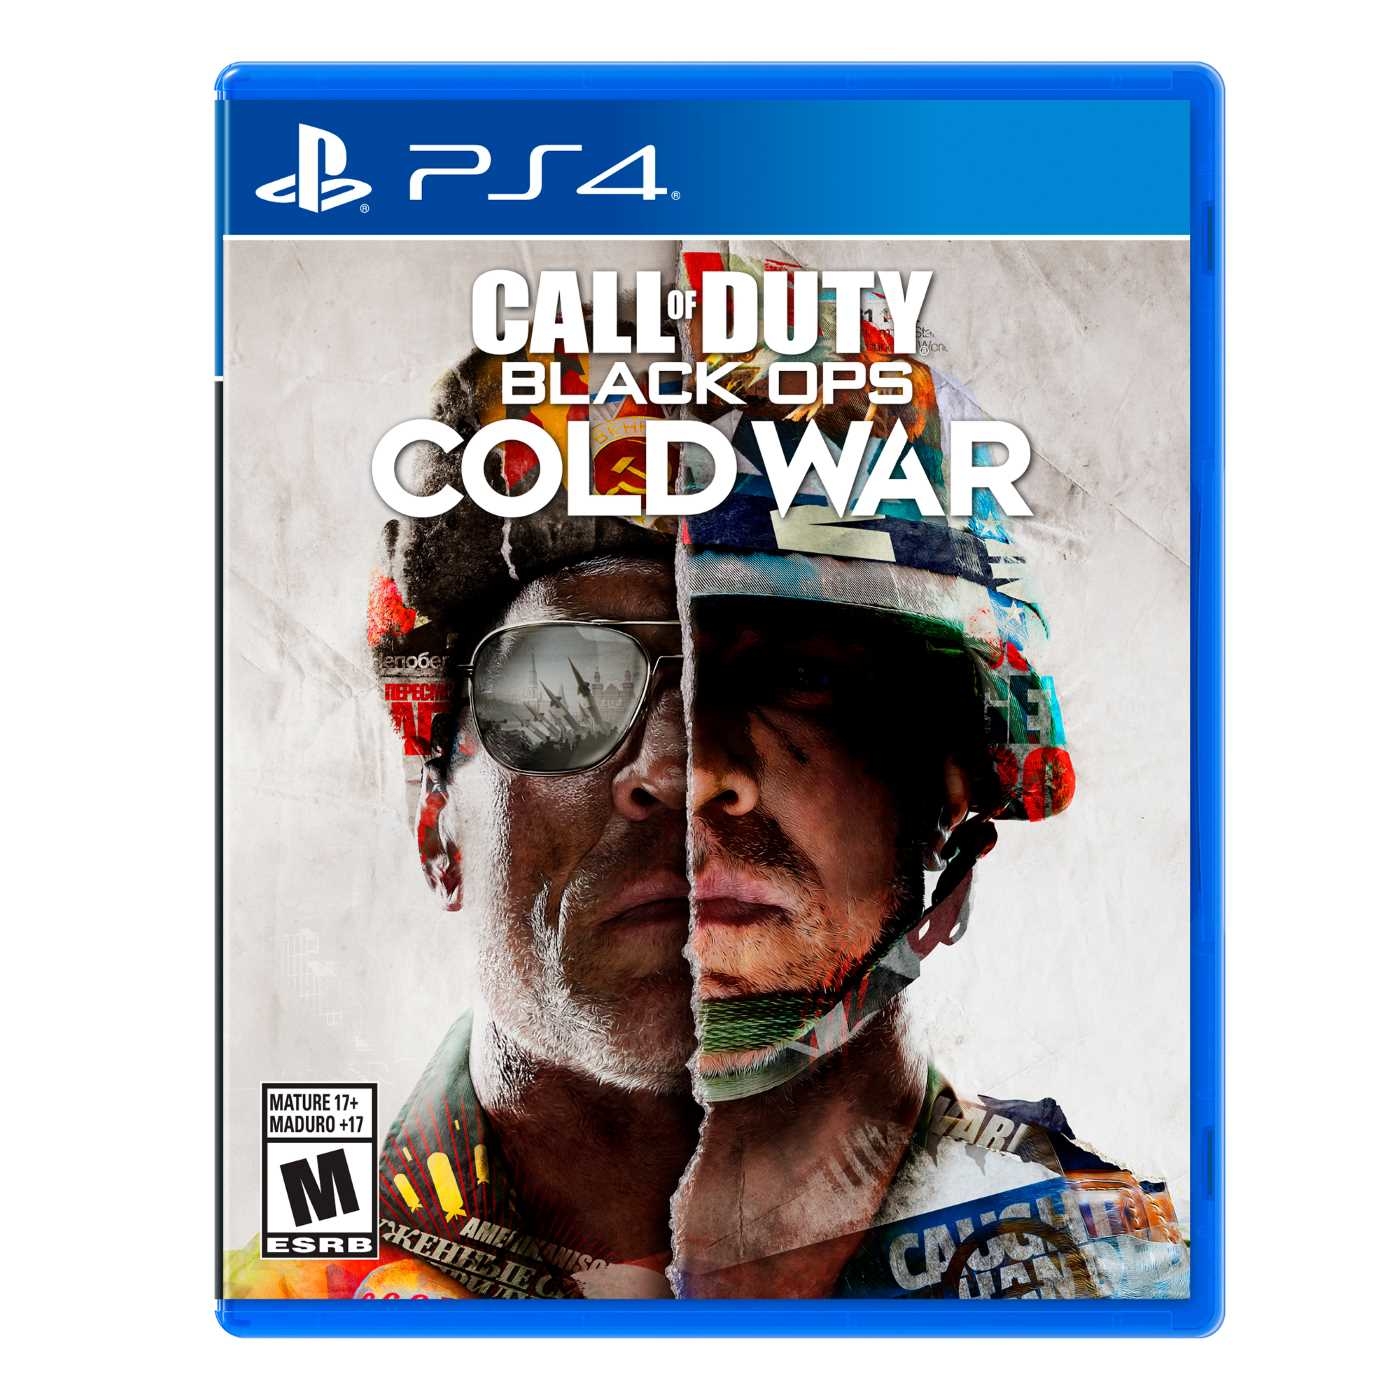 CALL OF DUTY BLACK OPS COLD WAR PS4 S/L